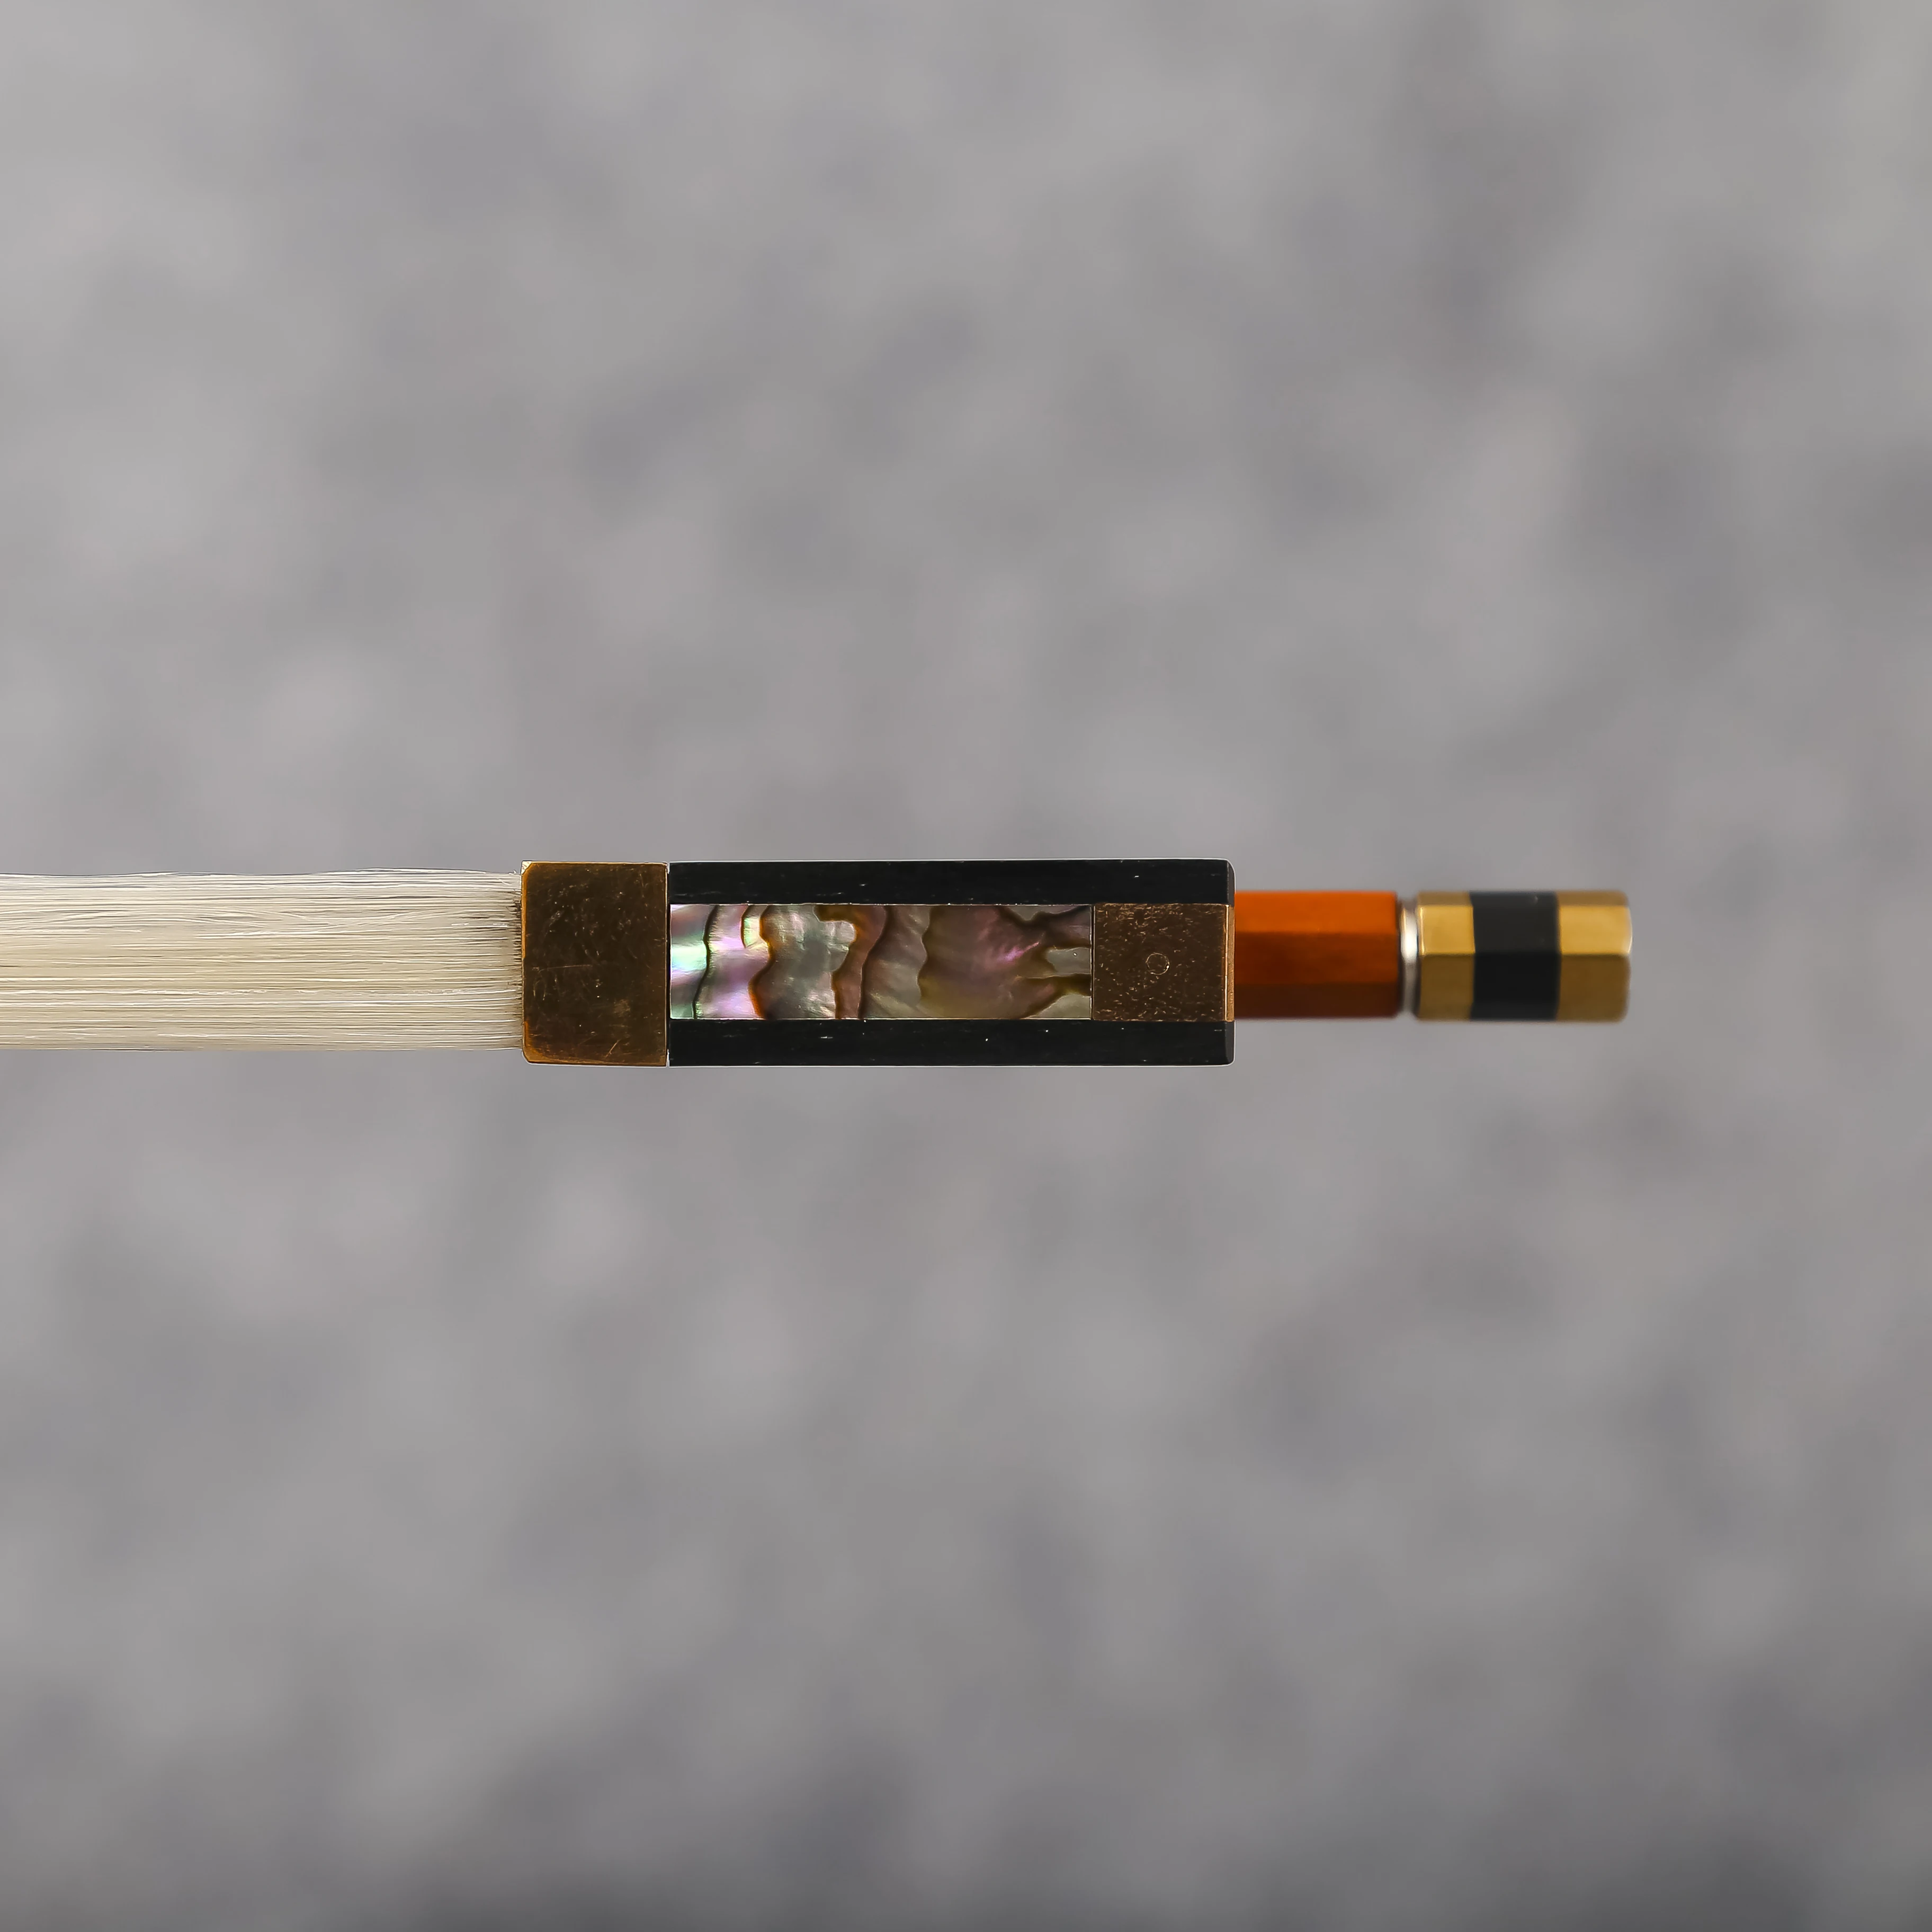 Free Shipping Pernambuco Violin Bow 4/4 Top Quality Round Stick With Solid Ebony Blank Frog And Coloured Abalone Slide FP981B enlarge